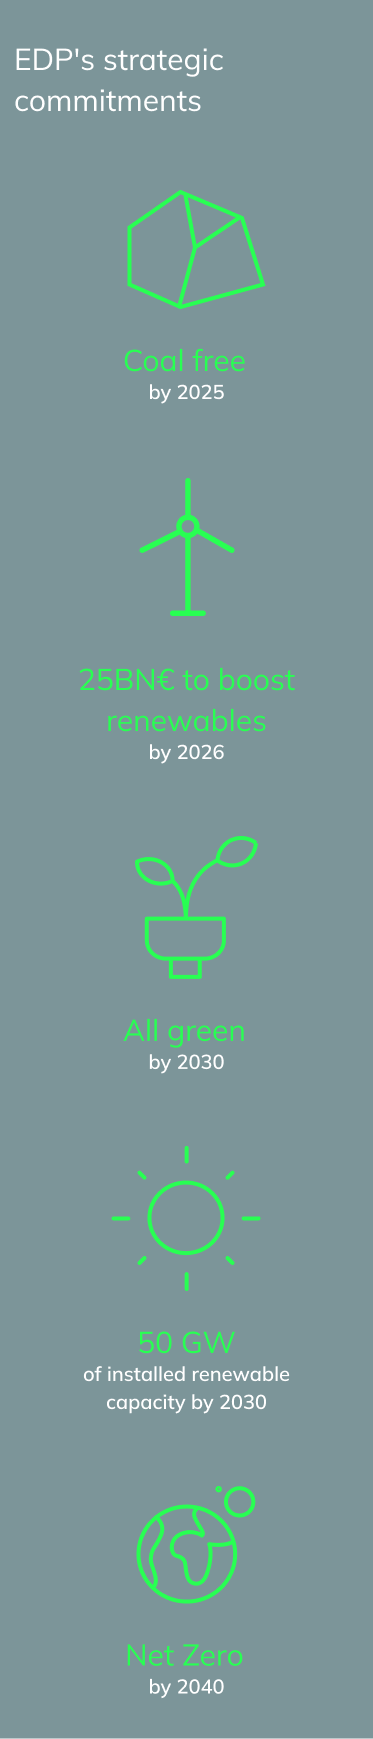 edp strategic commitments 2022 coal free by 2025, €25Bn to boost renewables by 2026, All green by 2030, 50 gw of installed renewable capacity by 2030, net Zero by 2040